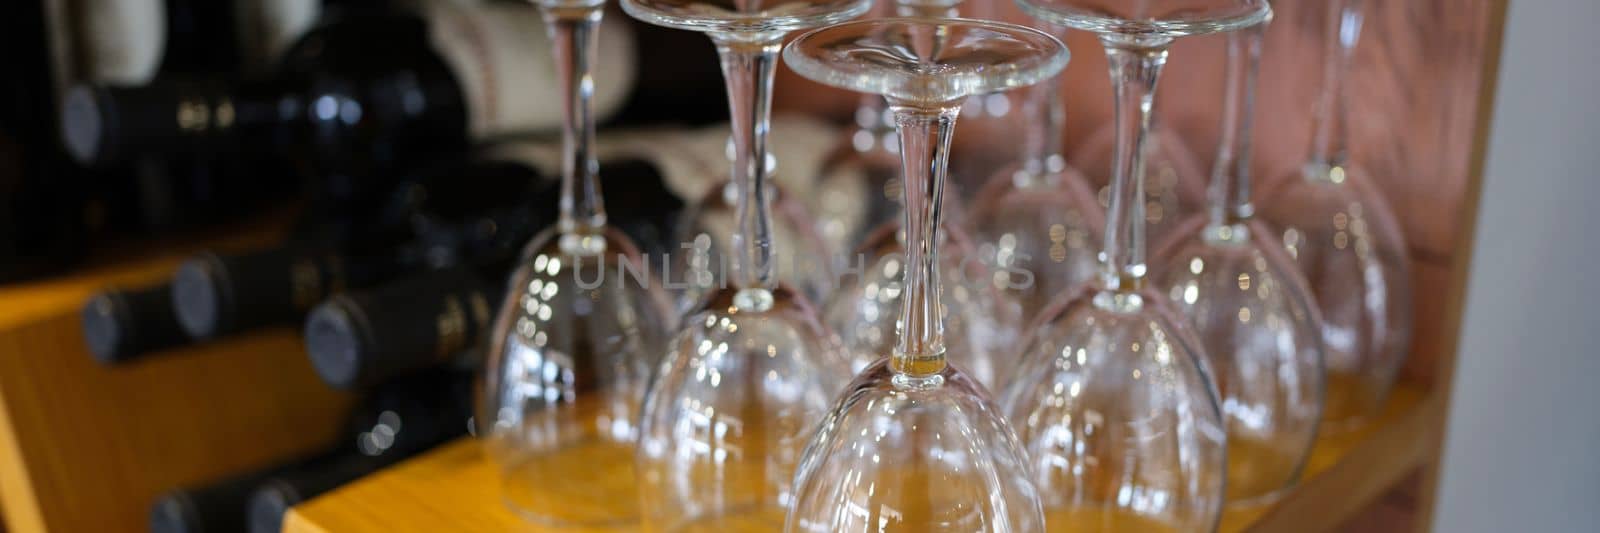 Wine bar with empty glasses and bottles of elite wine by kuprevich